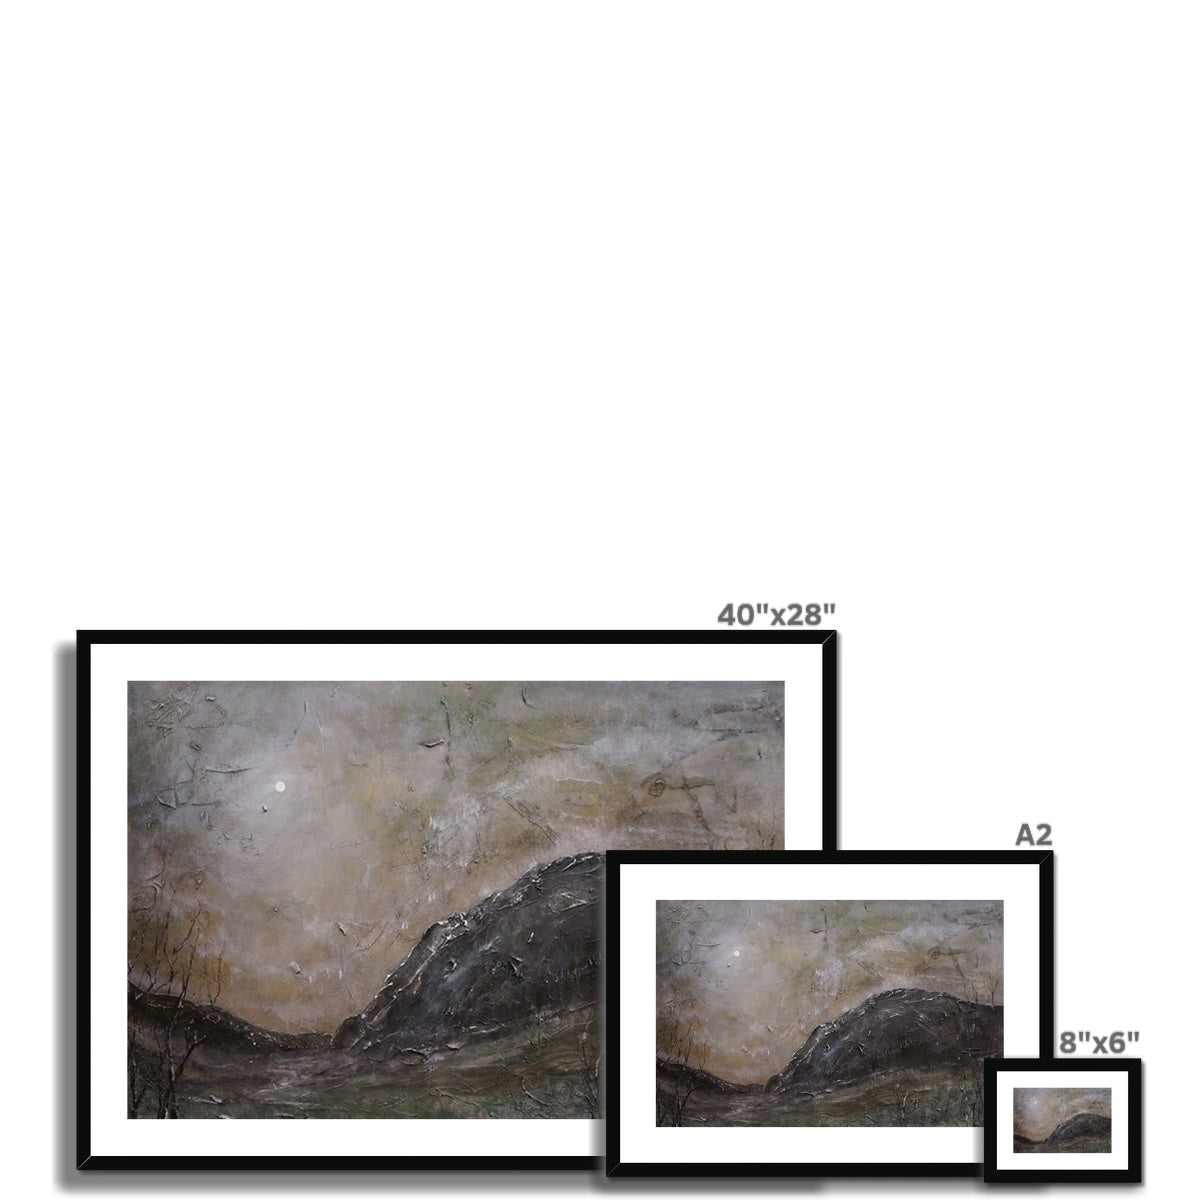 Glen Nevis Moonlight Painting | Framed & Mounted Prints From Scotland-Framed & Mounted Prints-Scottish Lochs & Mountains Art Gallery-Paintings, Prints, Homeware, Art Gifts From Scotland By Scottish Artist Kevin Hunter